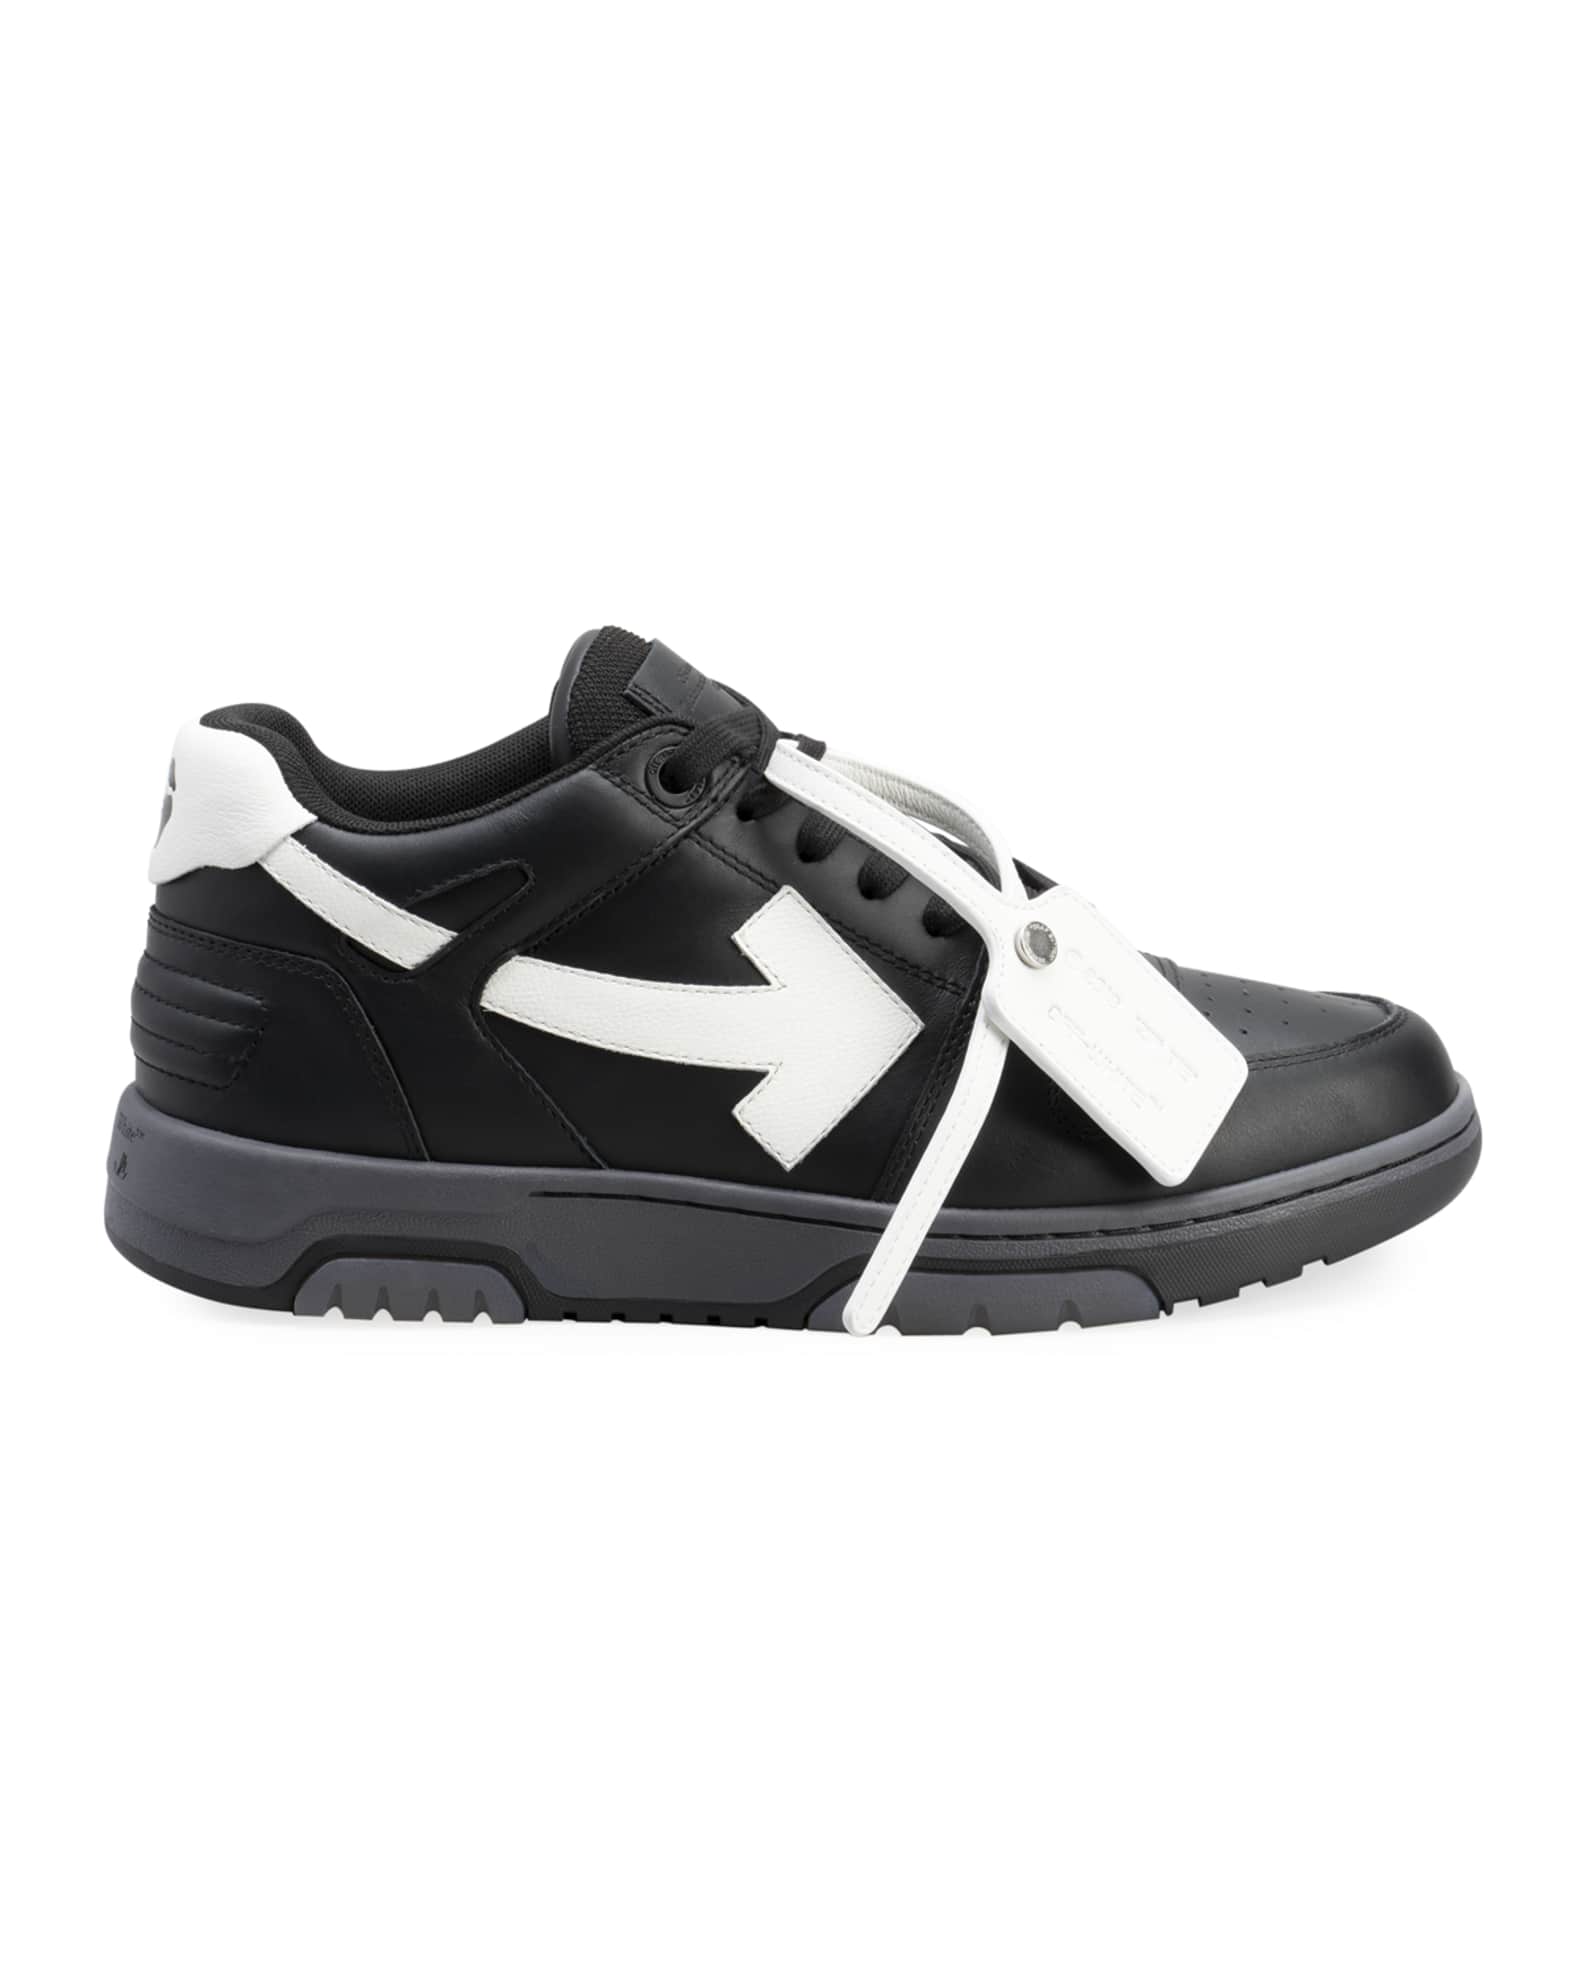 Off-White Men's Out of Office Bicolor Skate Sneakers | Neiman Marcus